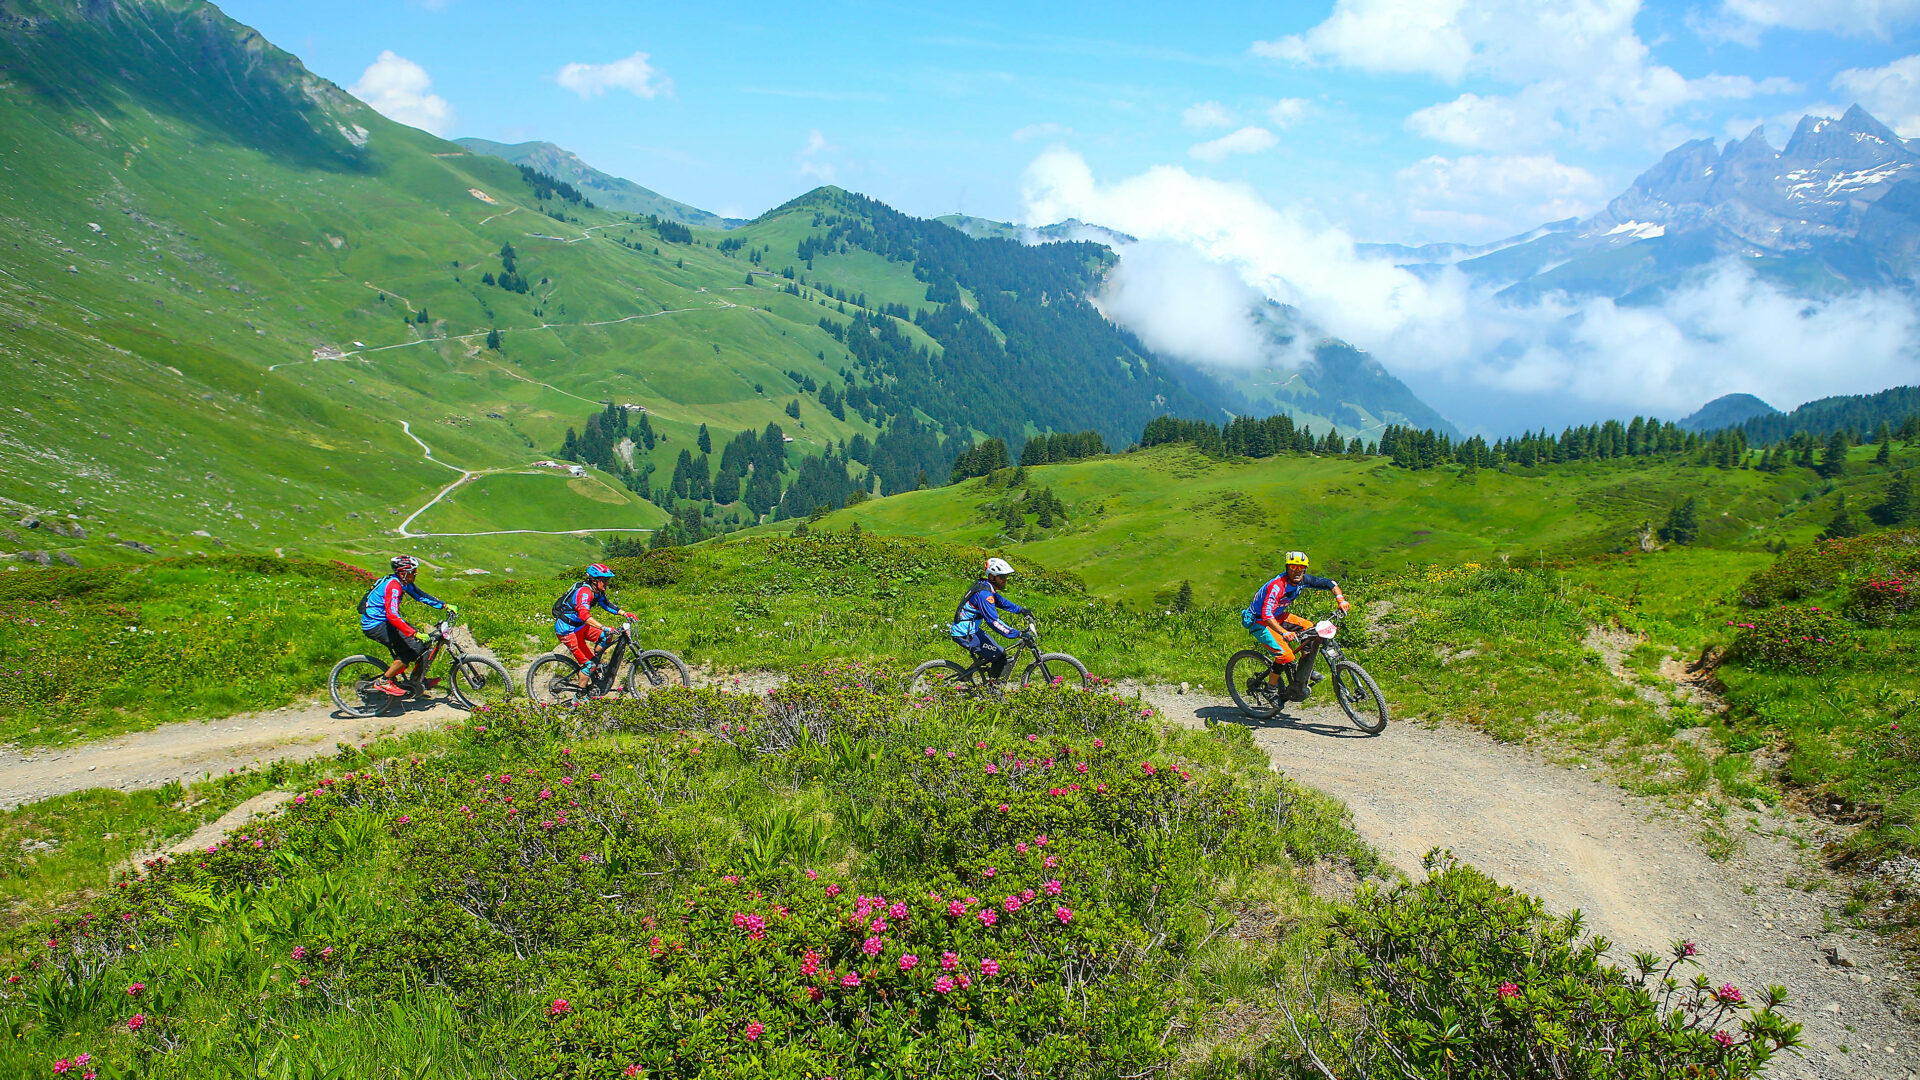 People riding Moutain bikes with moutains in the back